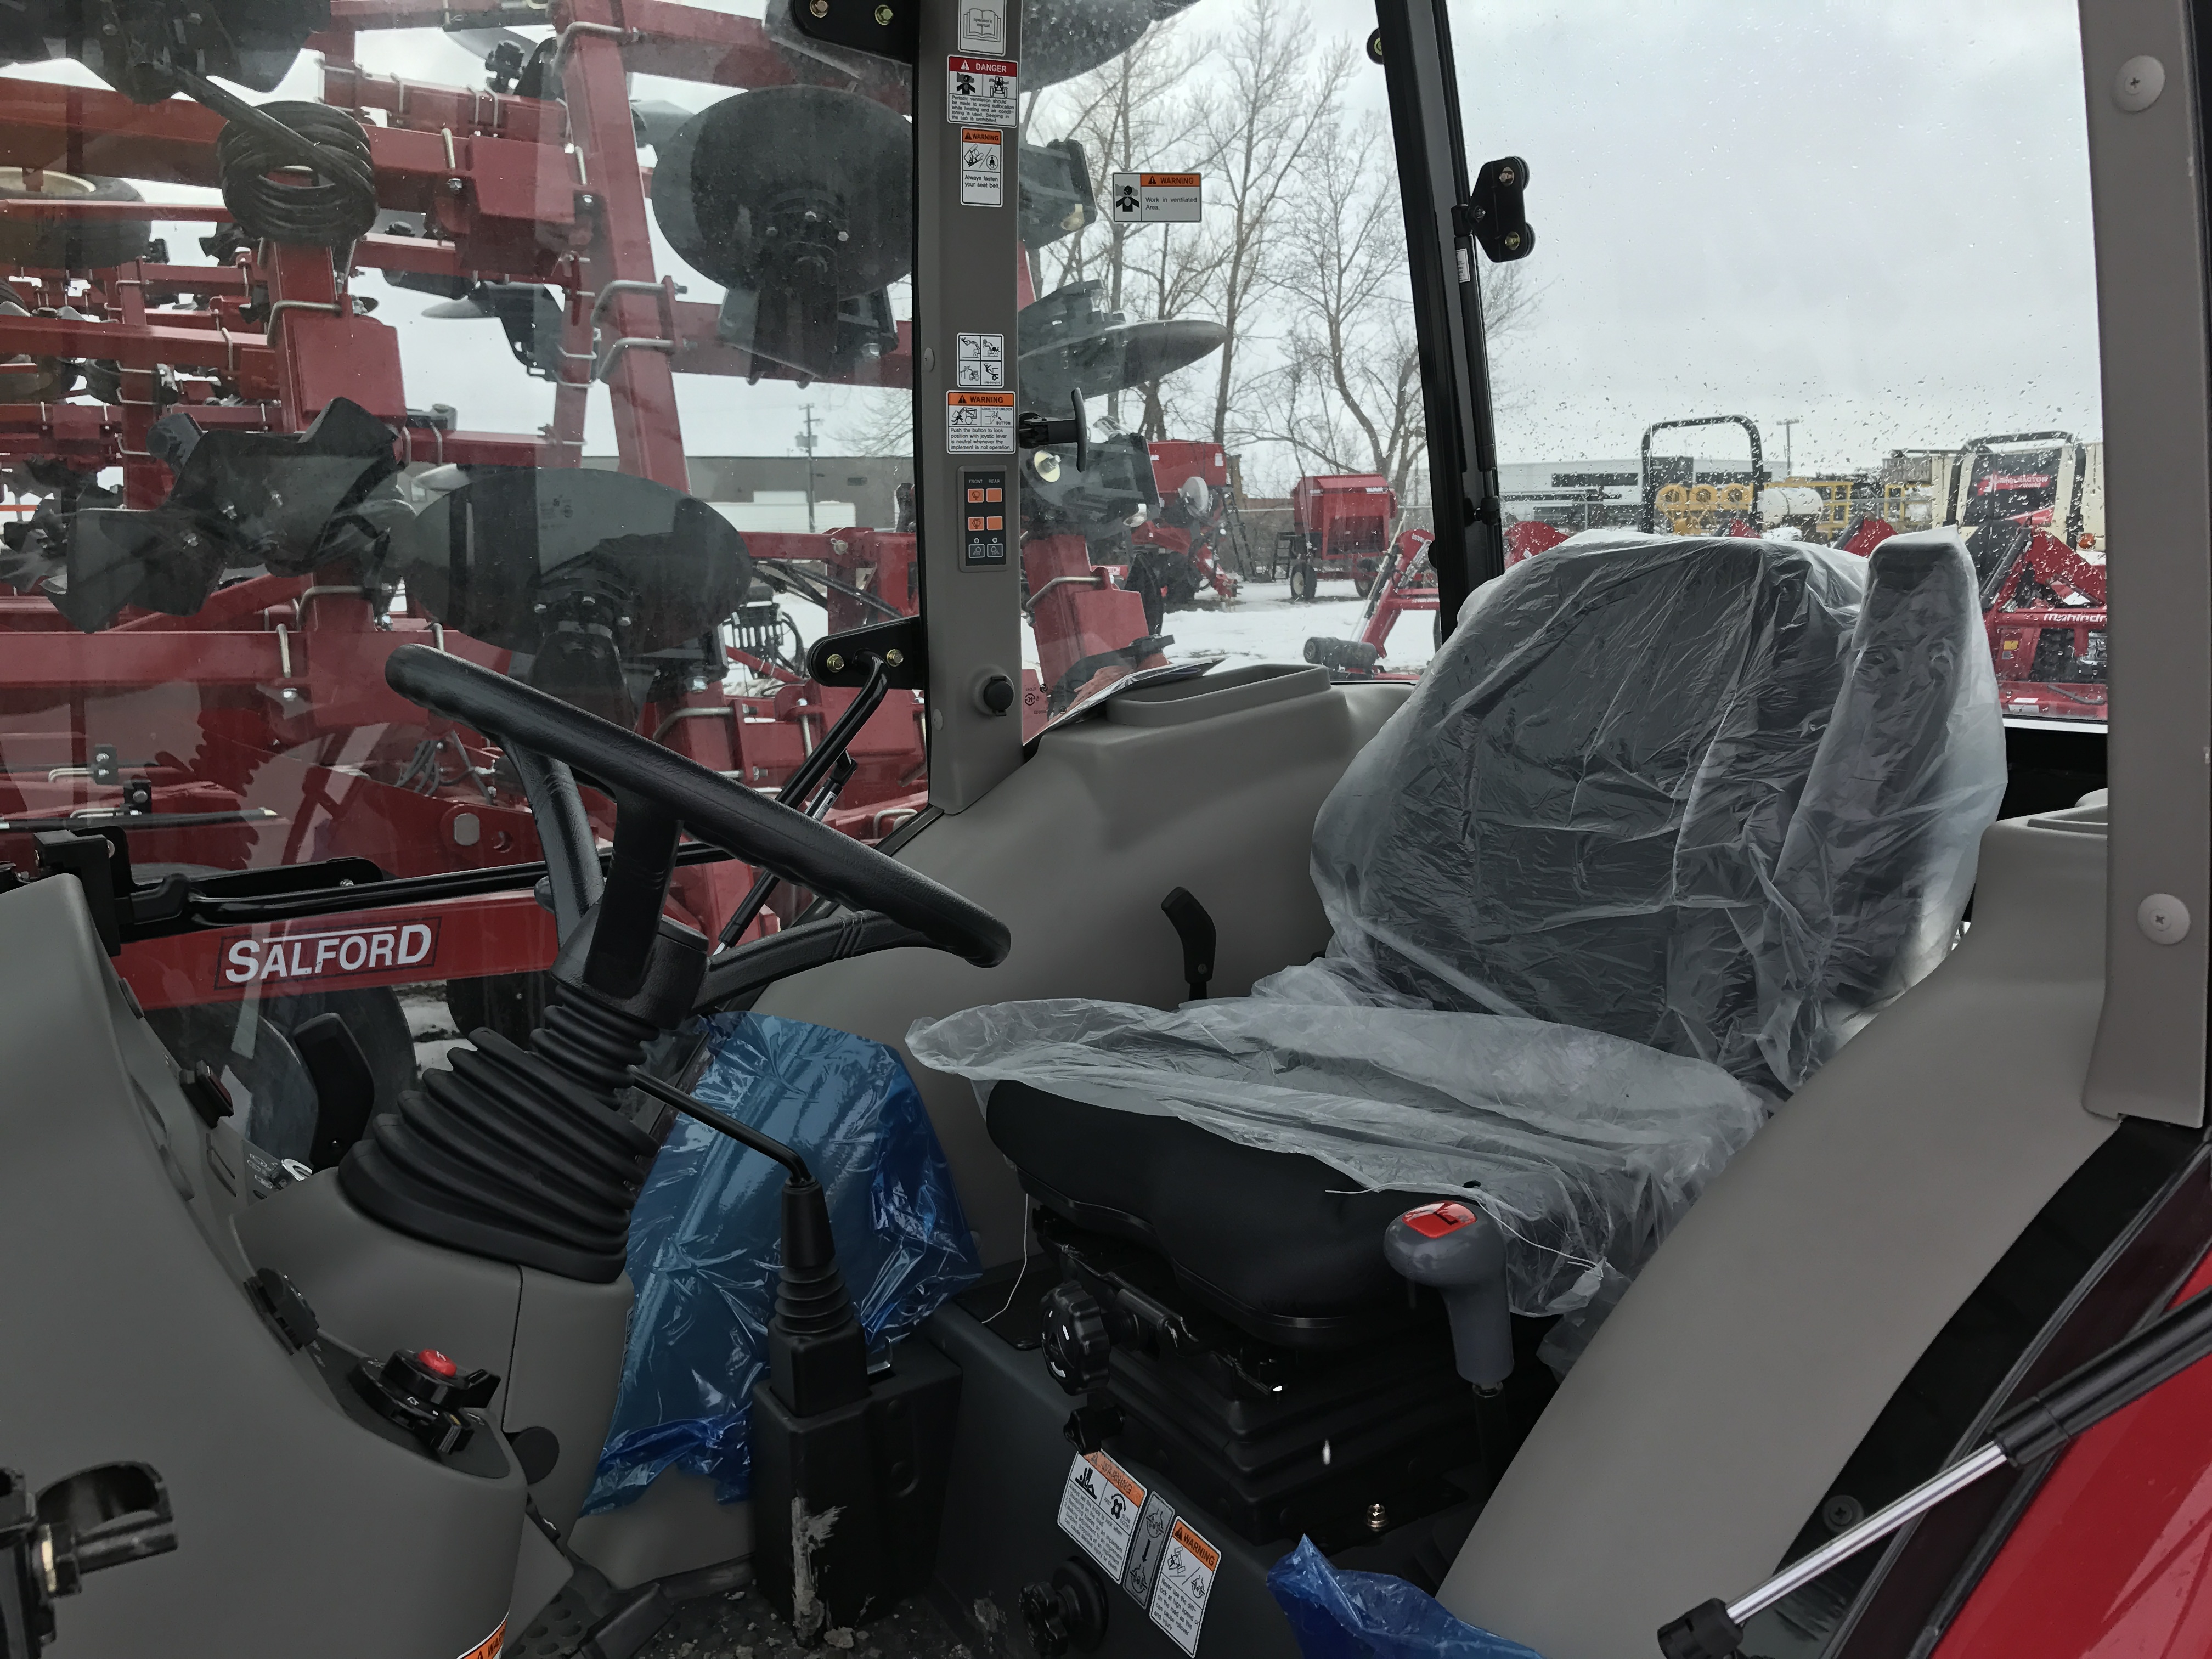 2016 Mahindra 2555 HST with cab Tractor